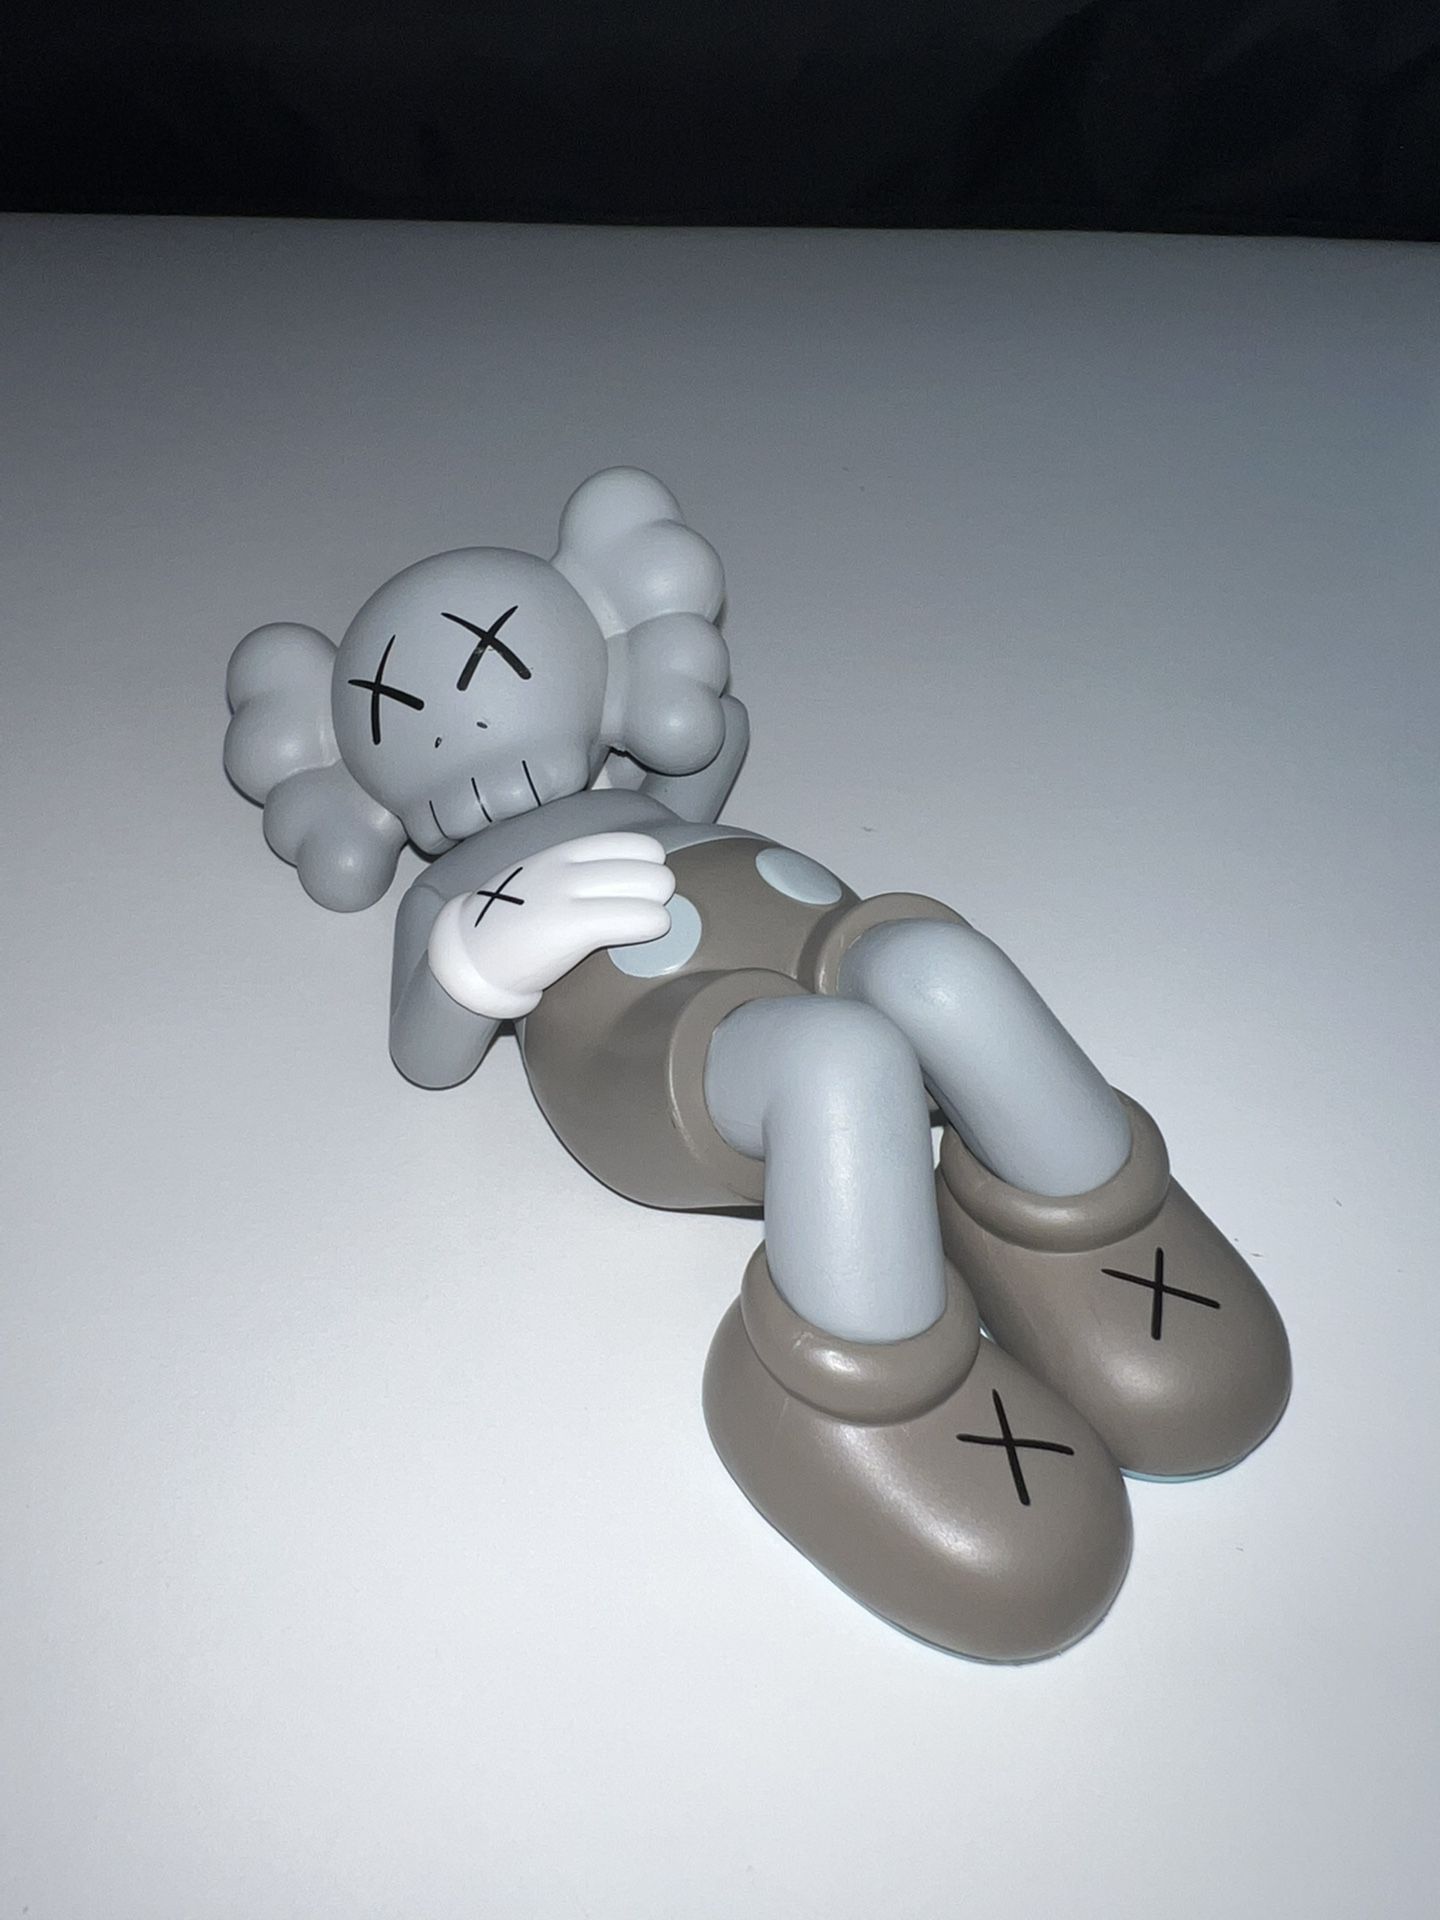 KAWS Inspired Sculpture Bear Figure Collectibles Building Blocks LAYING Down Home Decoration, Model Toy Unique - Gray 